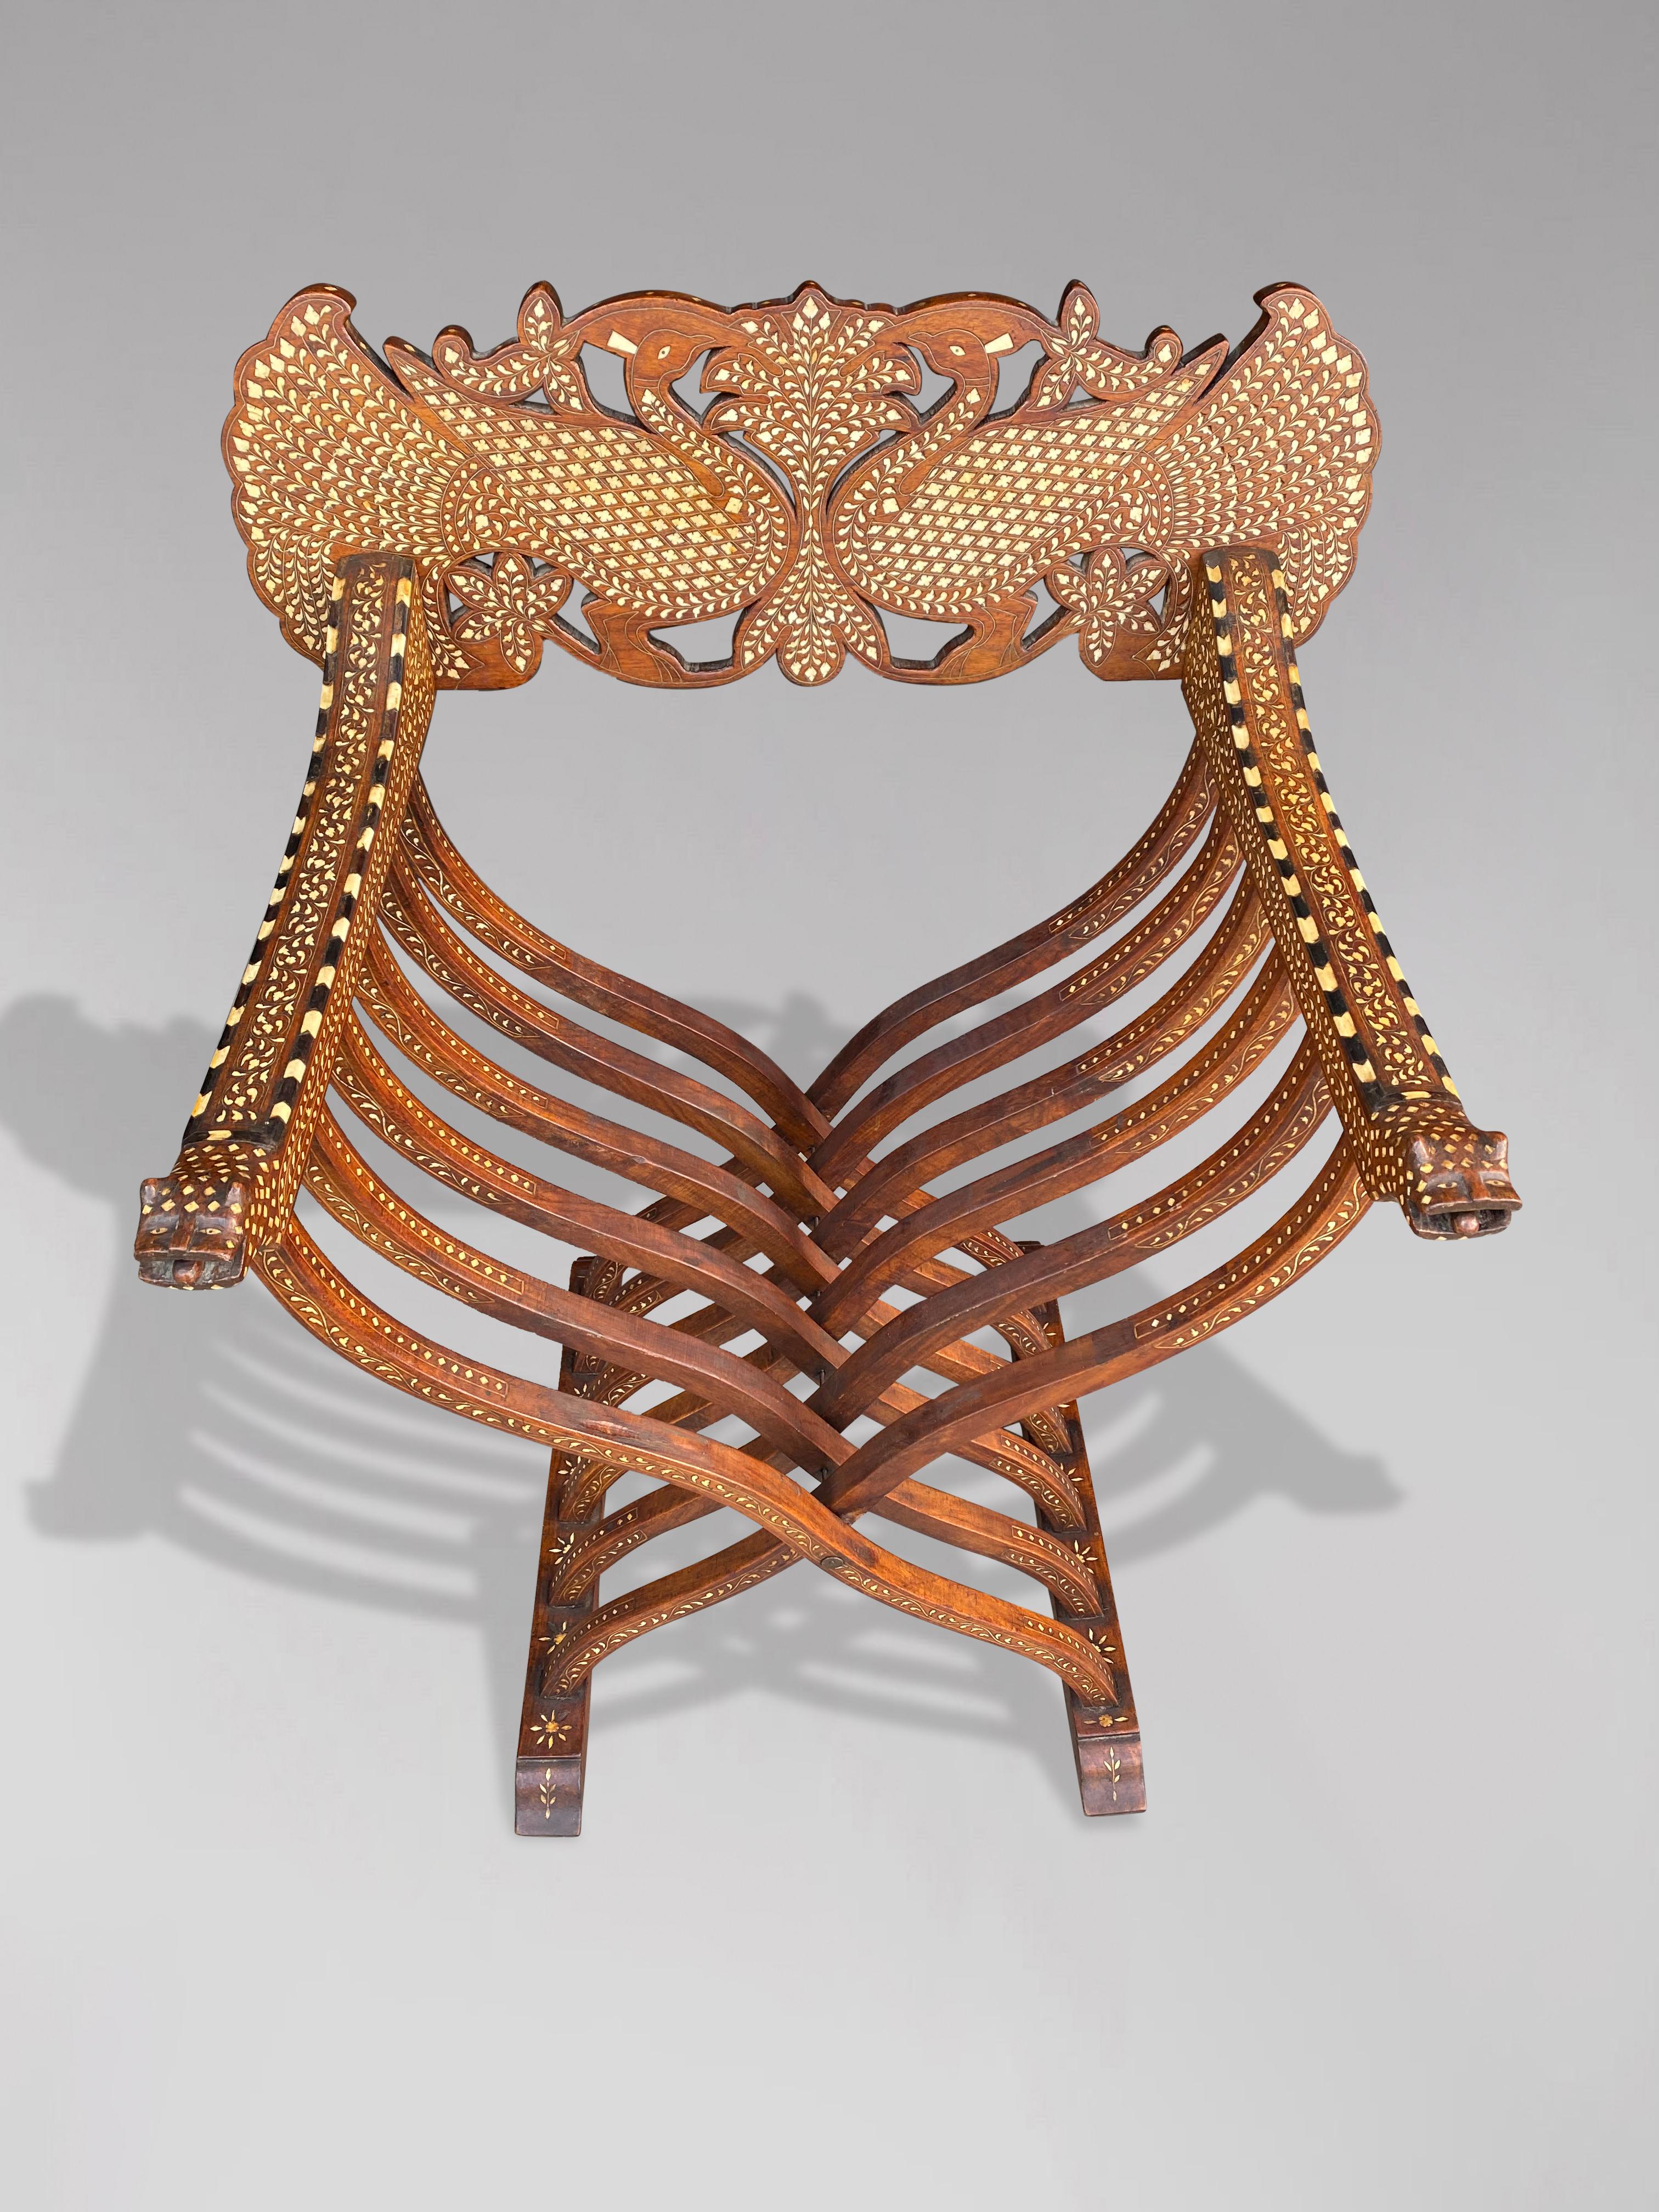 Hand-Crafted 19th Century Indian Folding Savonarola Armchair For Sale